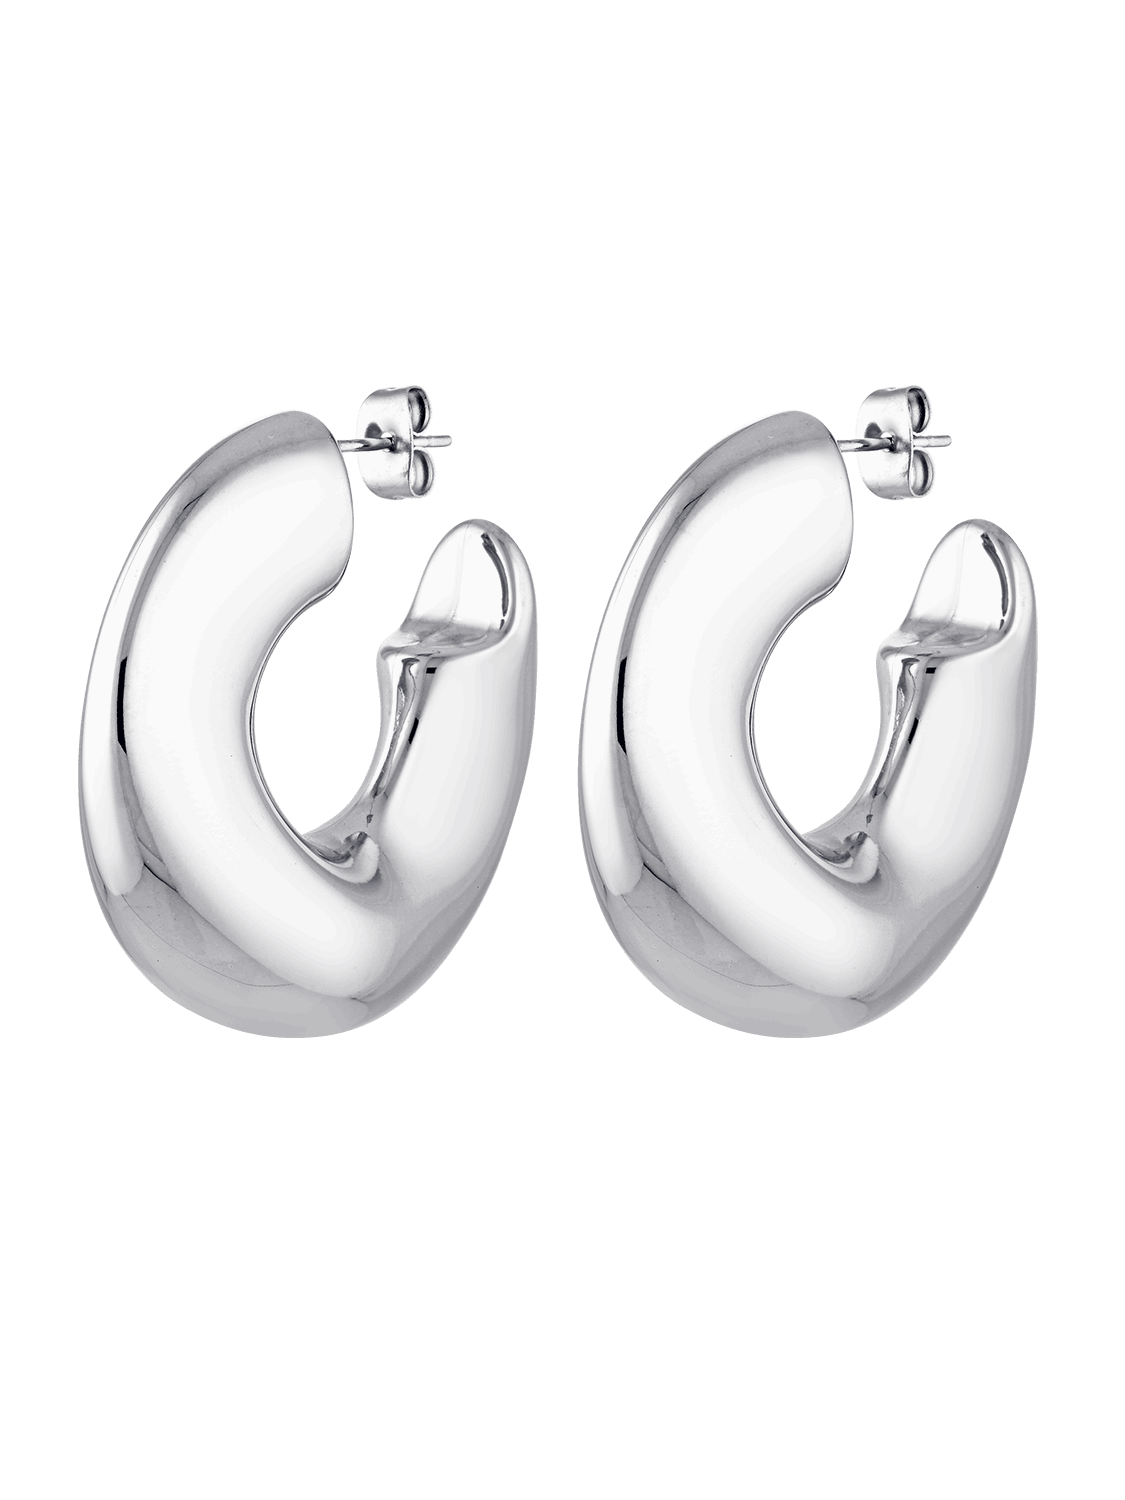 Our large silver hoops called Swell Hoops